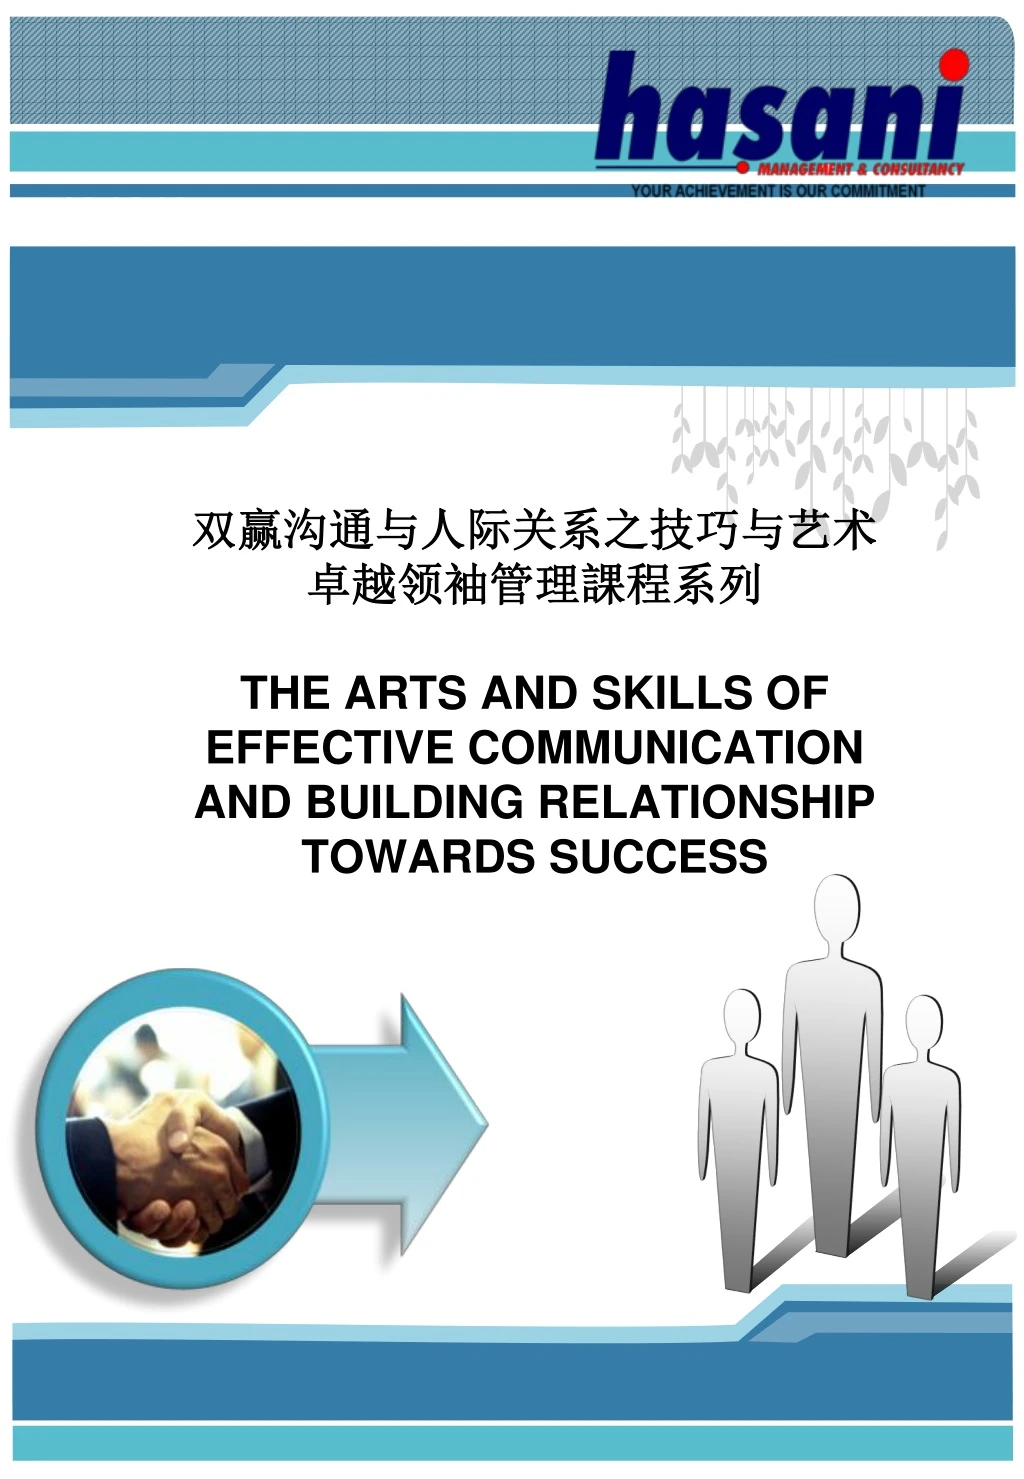 the arts and skills of effective communication and building relationship towards success